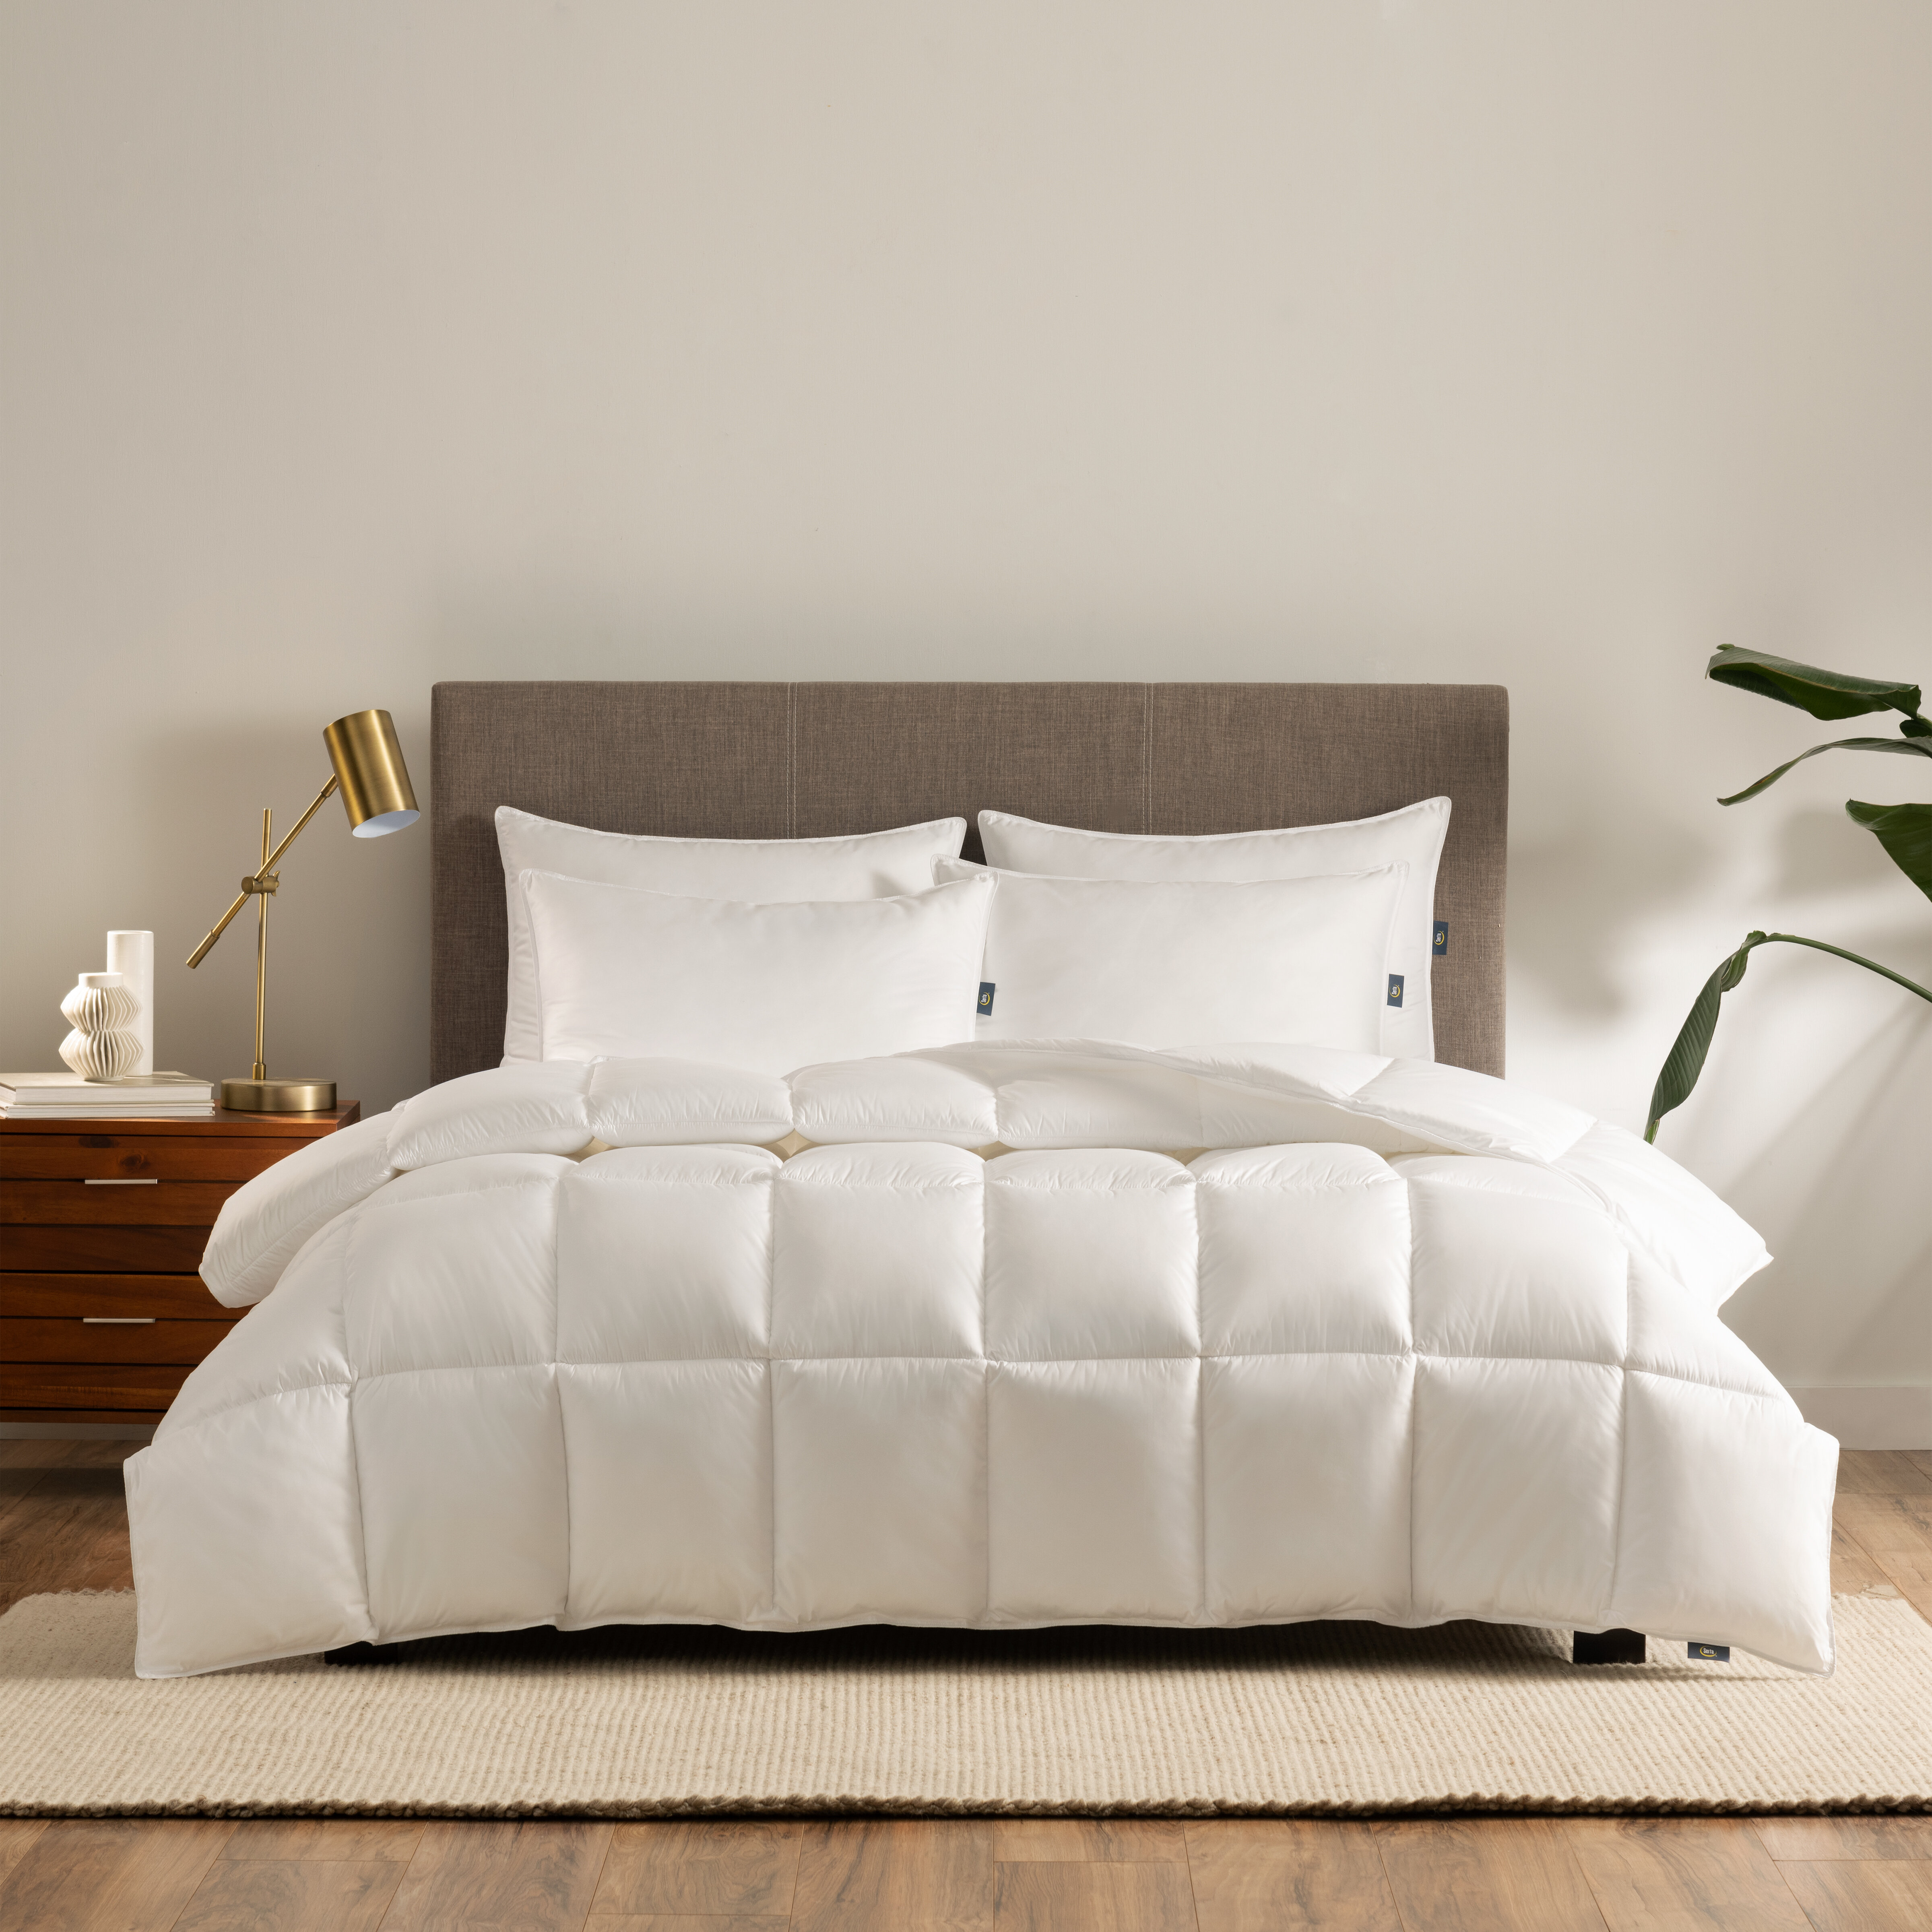 Hypoallergenic White, Twin Down Proof Lightweight Warmth-All Seasons Bedding Twin Comforter Down Alternative White Hotel Collection Reversible Duvet Insert with Corner Taps